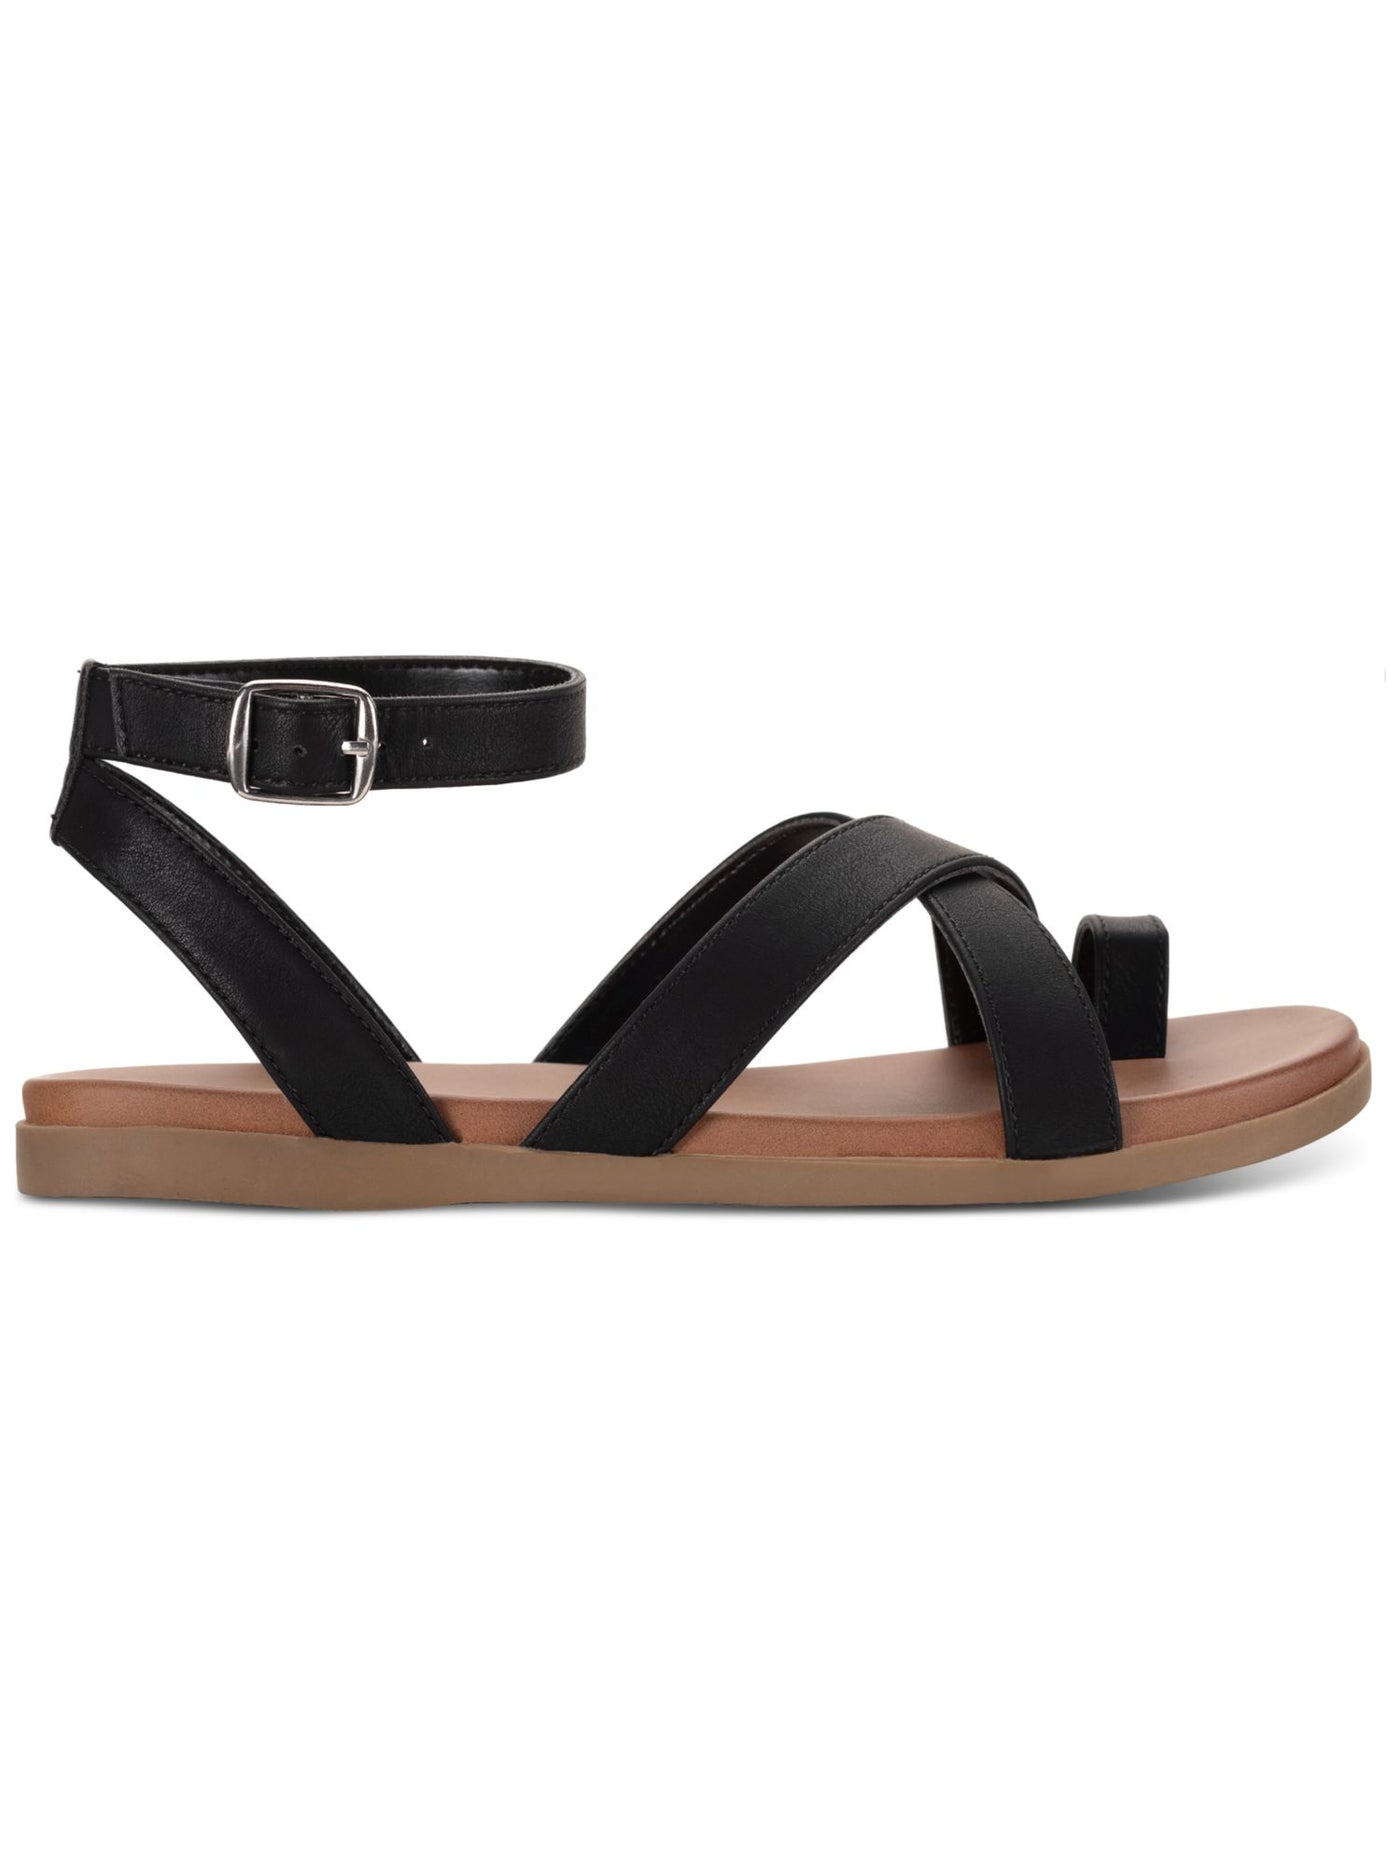 STYLE & COMPANY Womens Black Toe Loop Ankle Strap Lianaa Round Toe Buckle Sandals 8 M